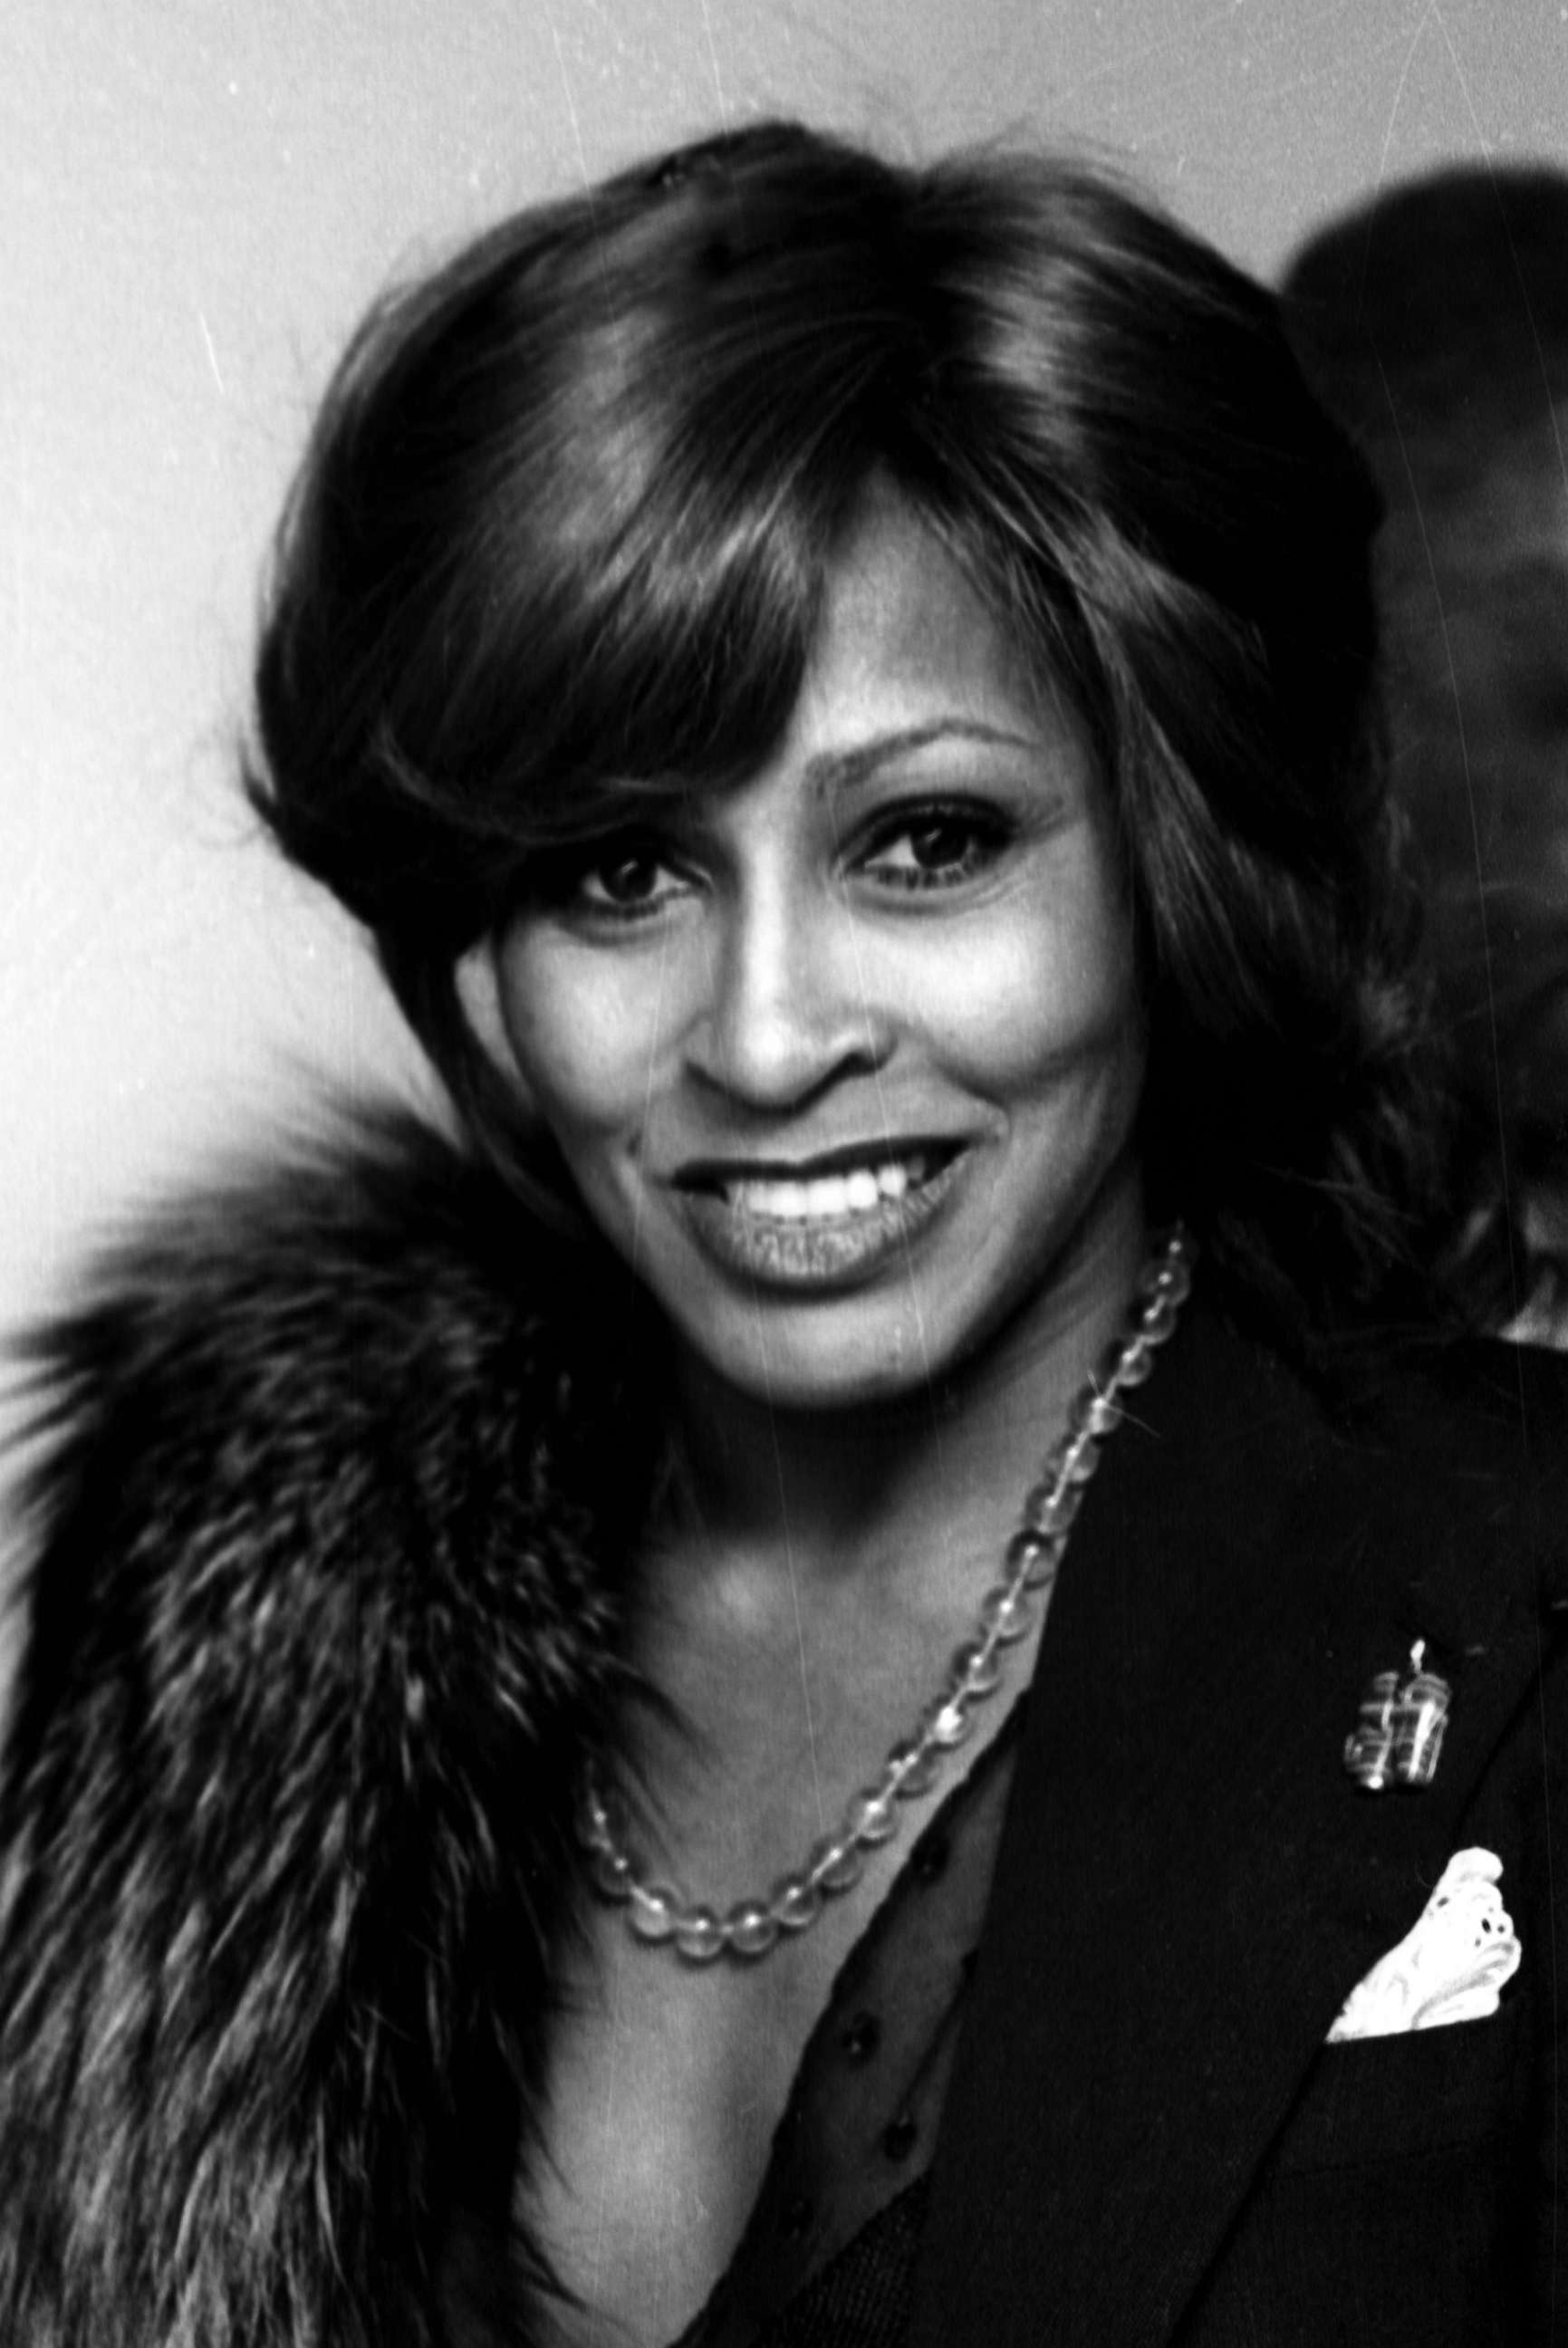 PHOTO: FILE - Tina Turner attends Best of Vegas Awards, March 21, 1980 at the Tropicana Hotel in Las Vegas.